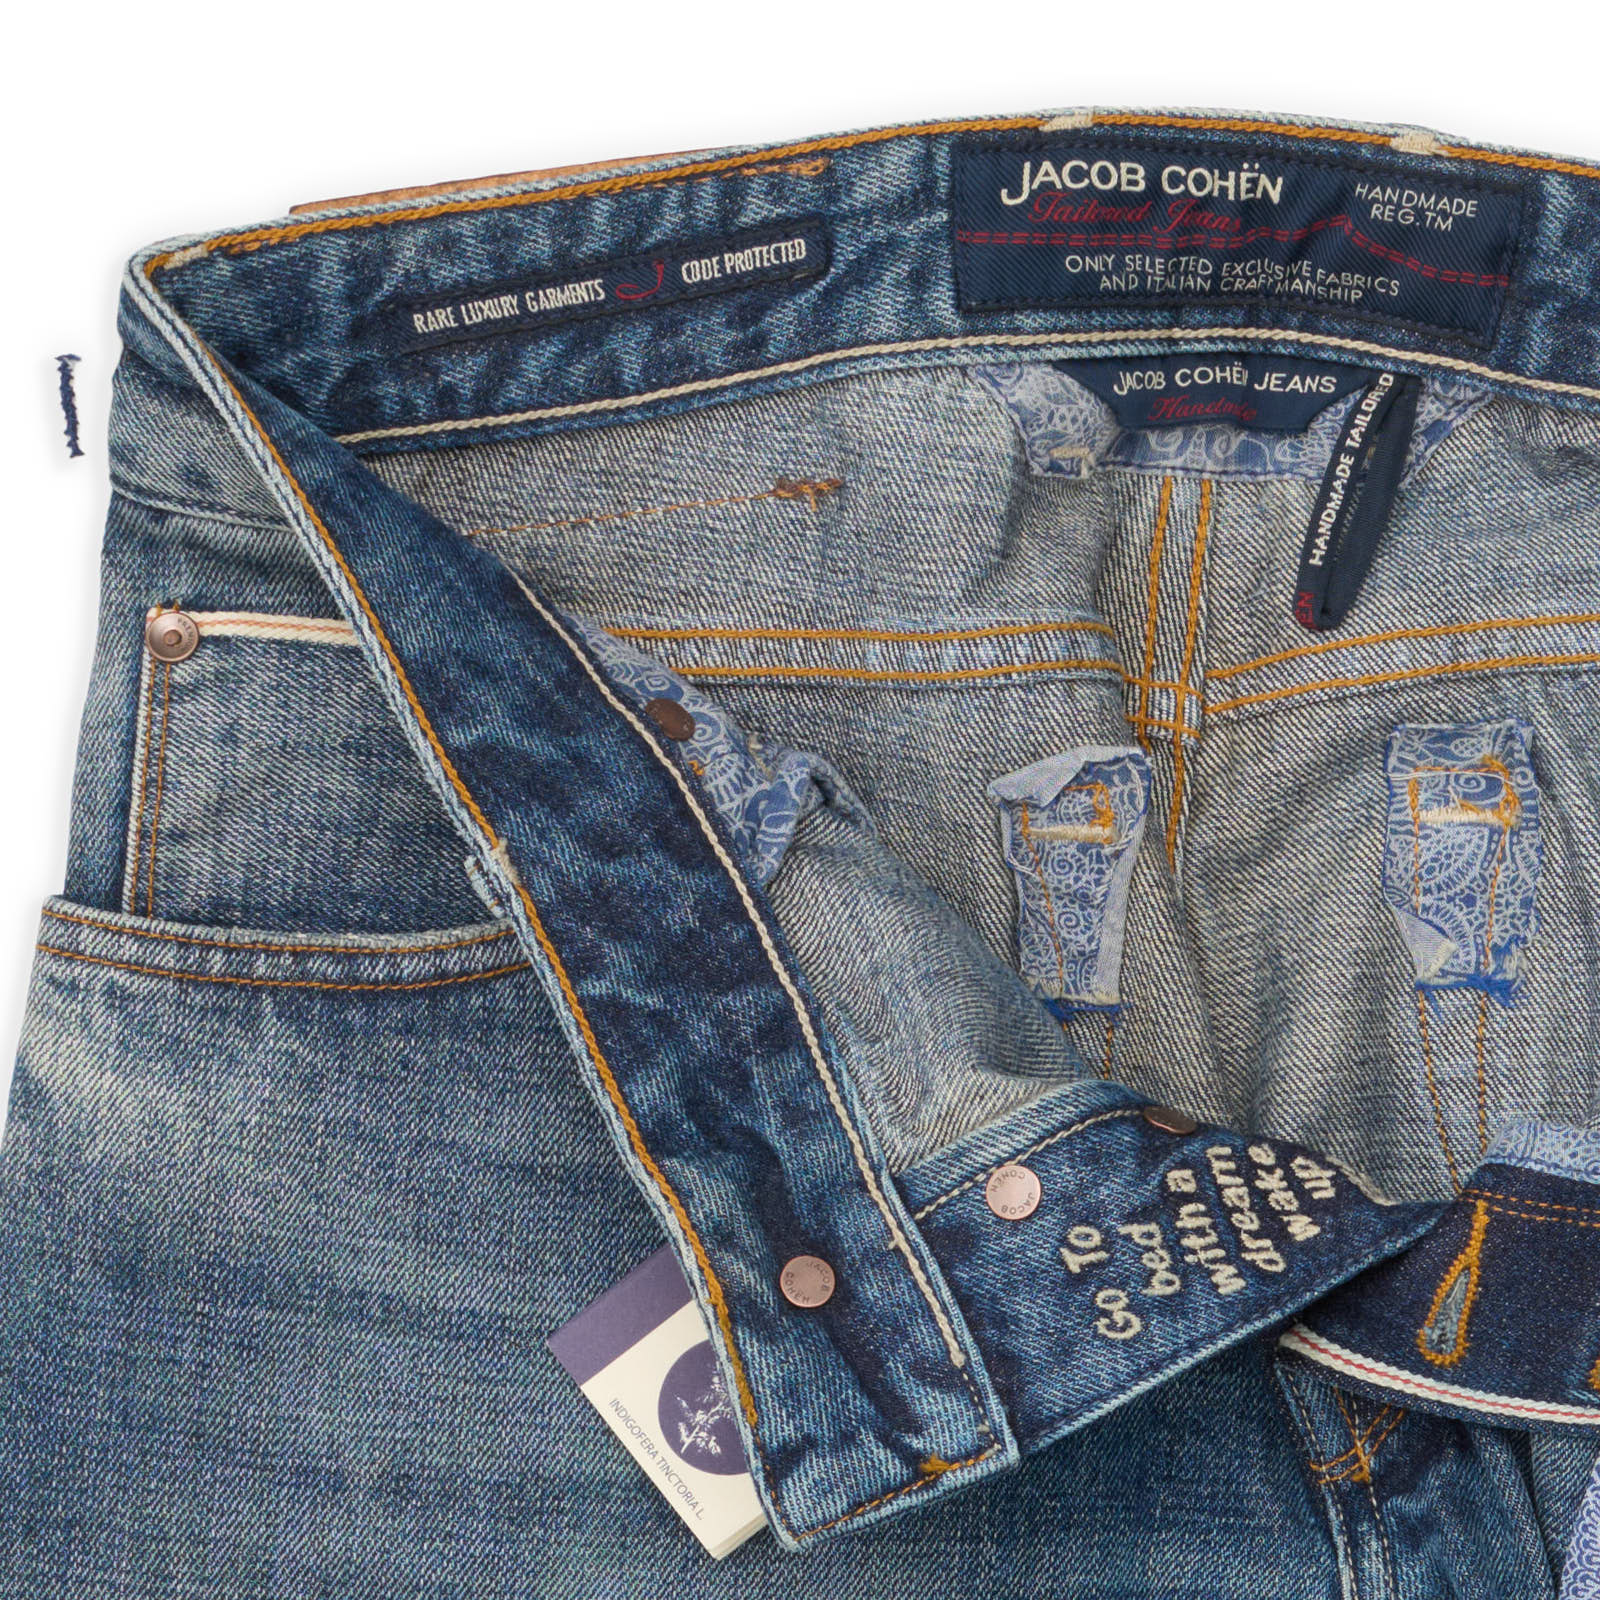 JACOB COHEN Handmade Limited Edition Blue Faded Denim Jeans Pants NEW US 30